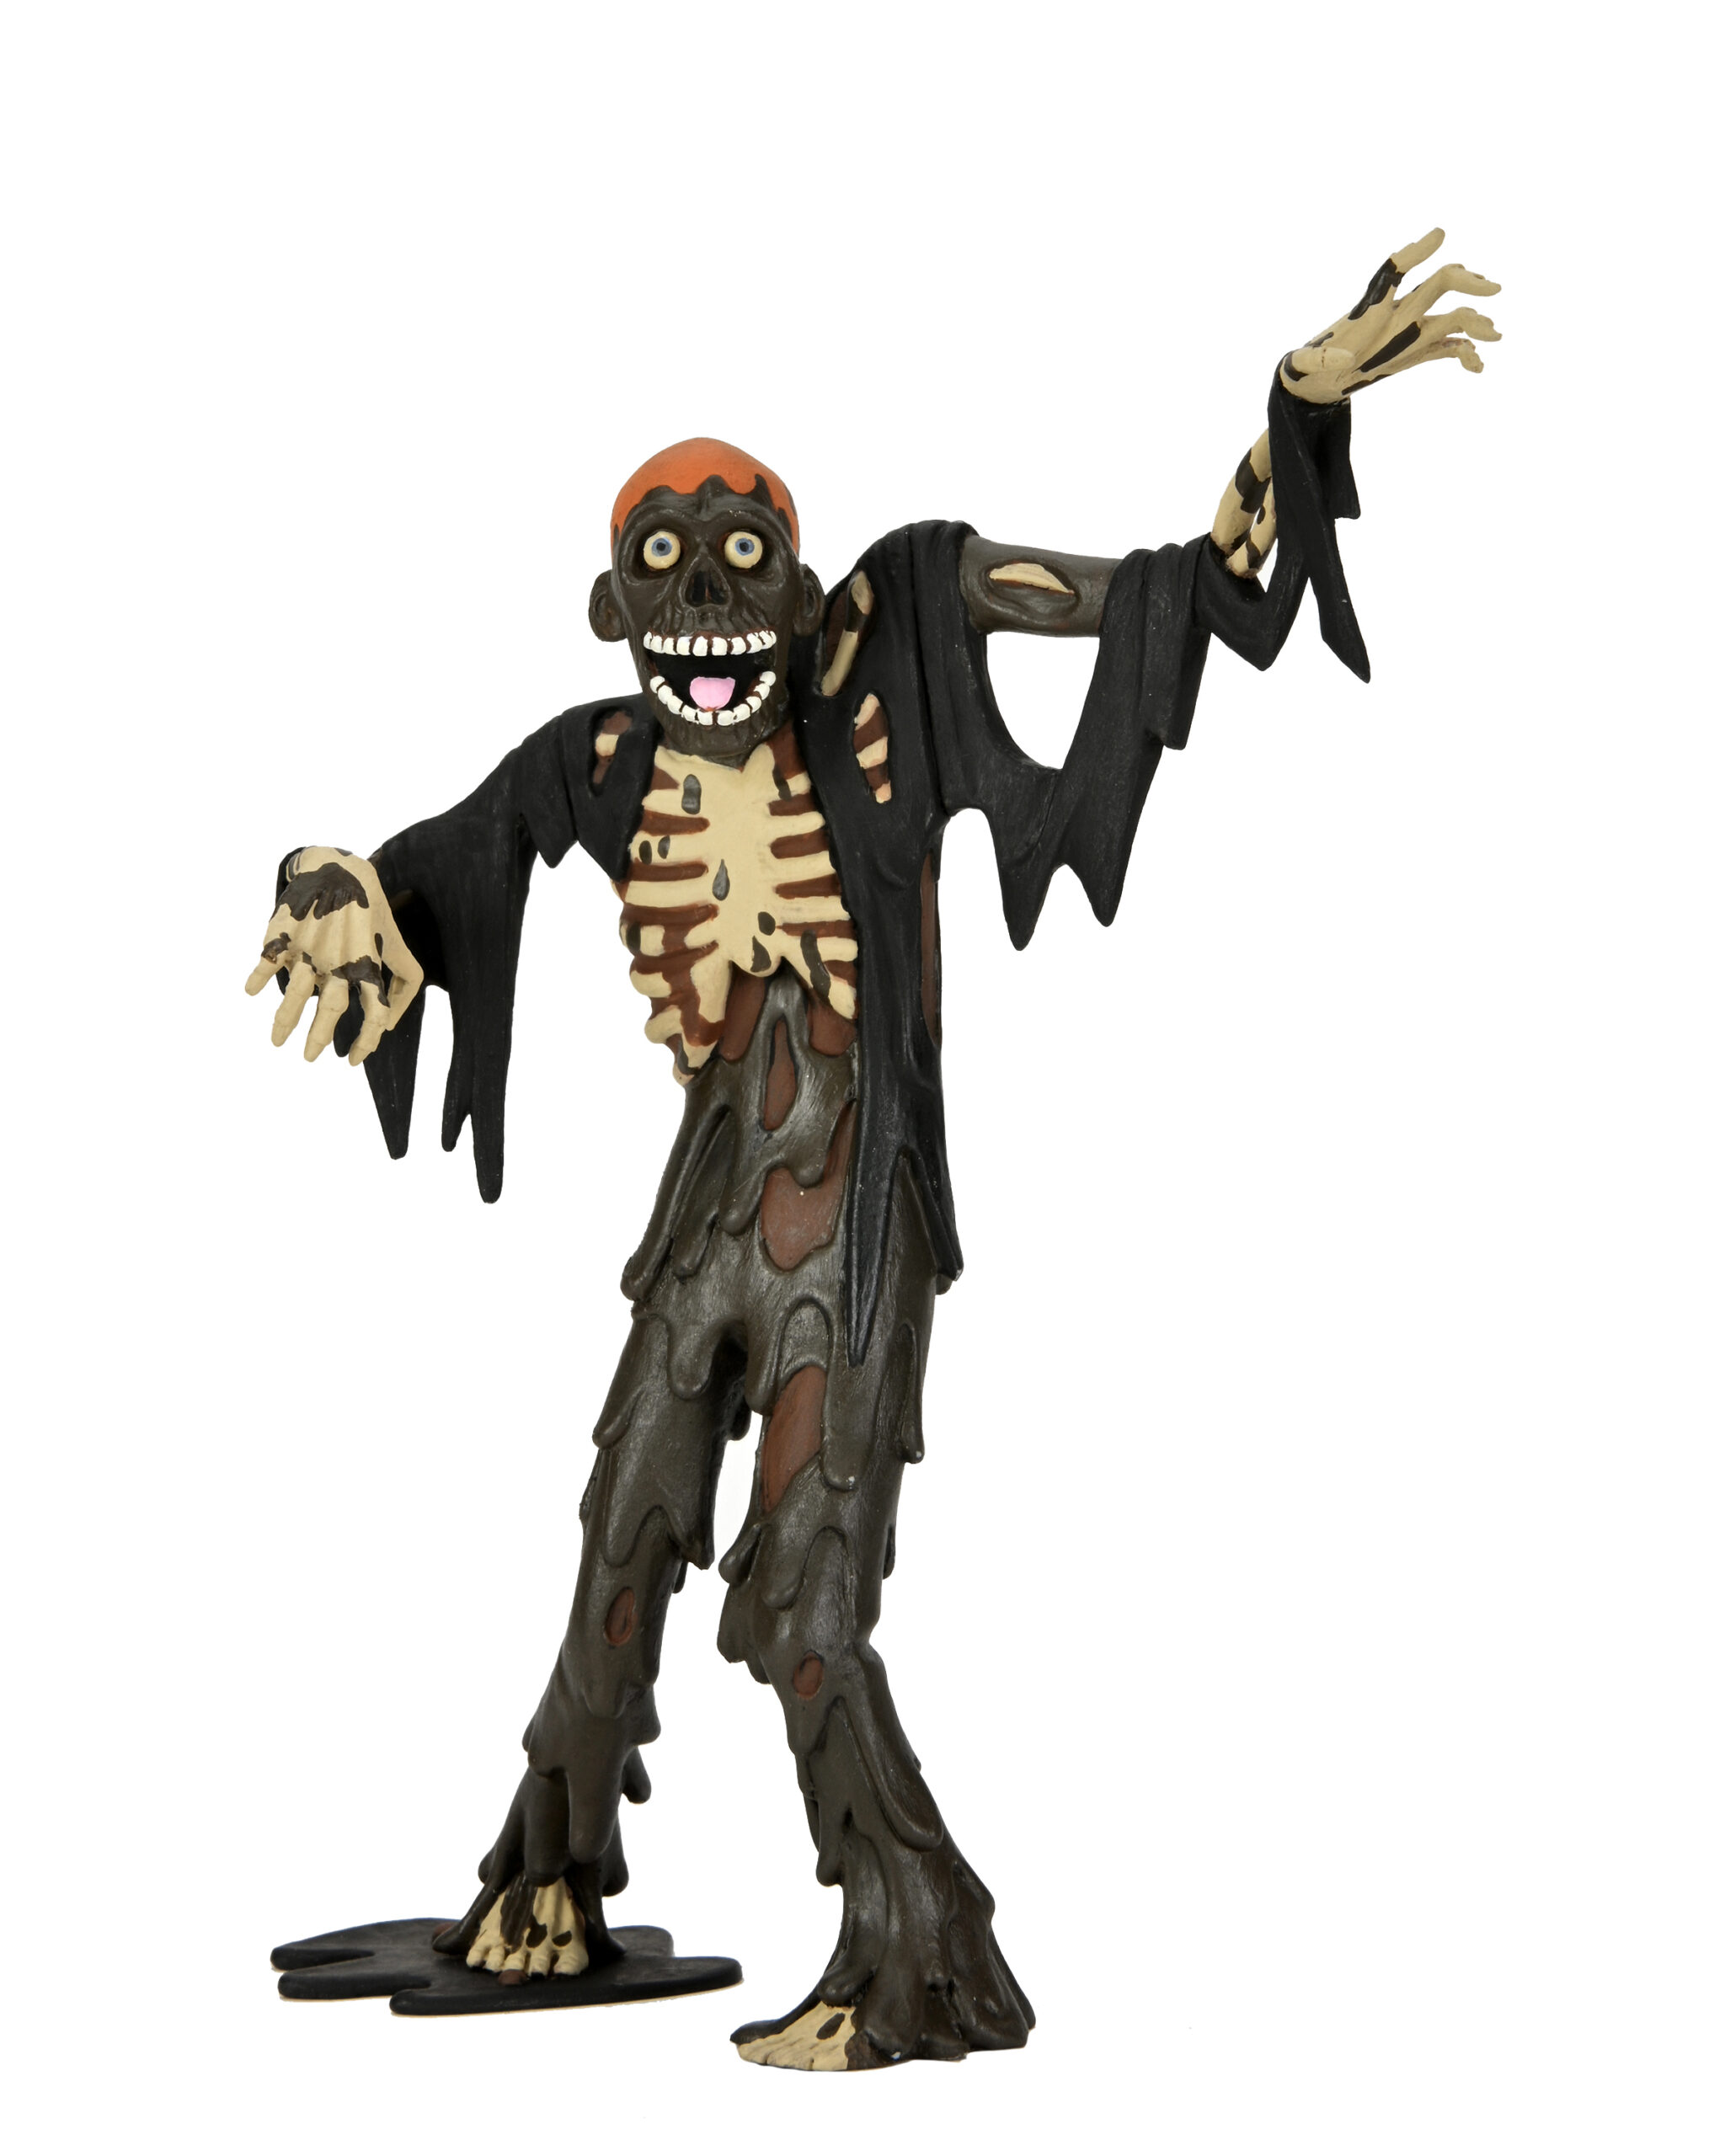 NECA Toony Terrors Series 9 The Fiend (mascot of The Misfits) 6-Inch S